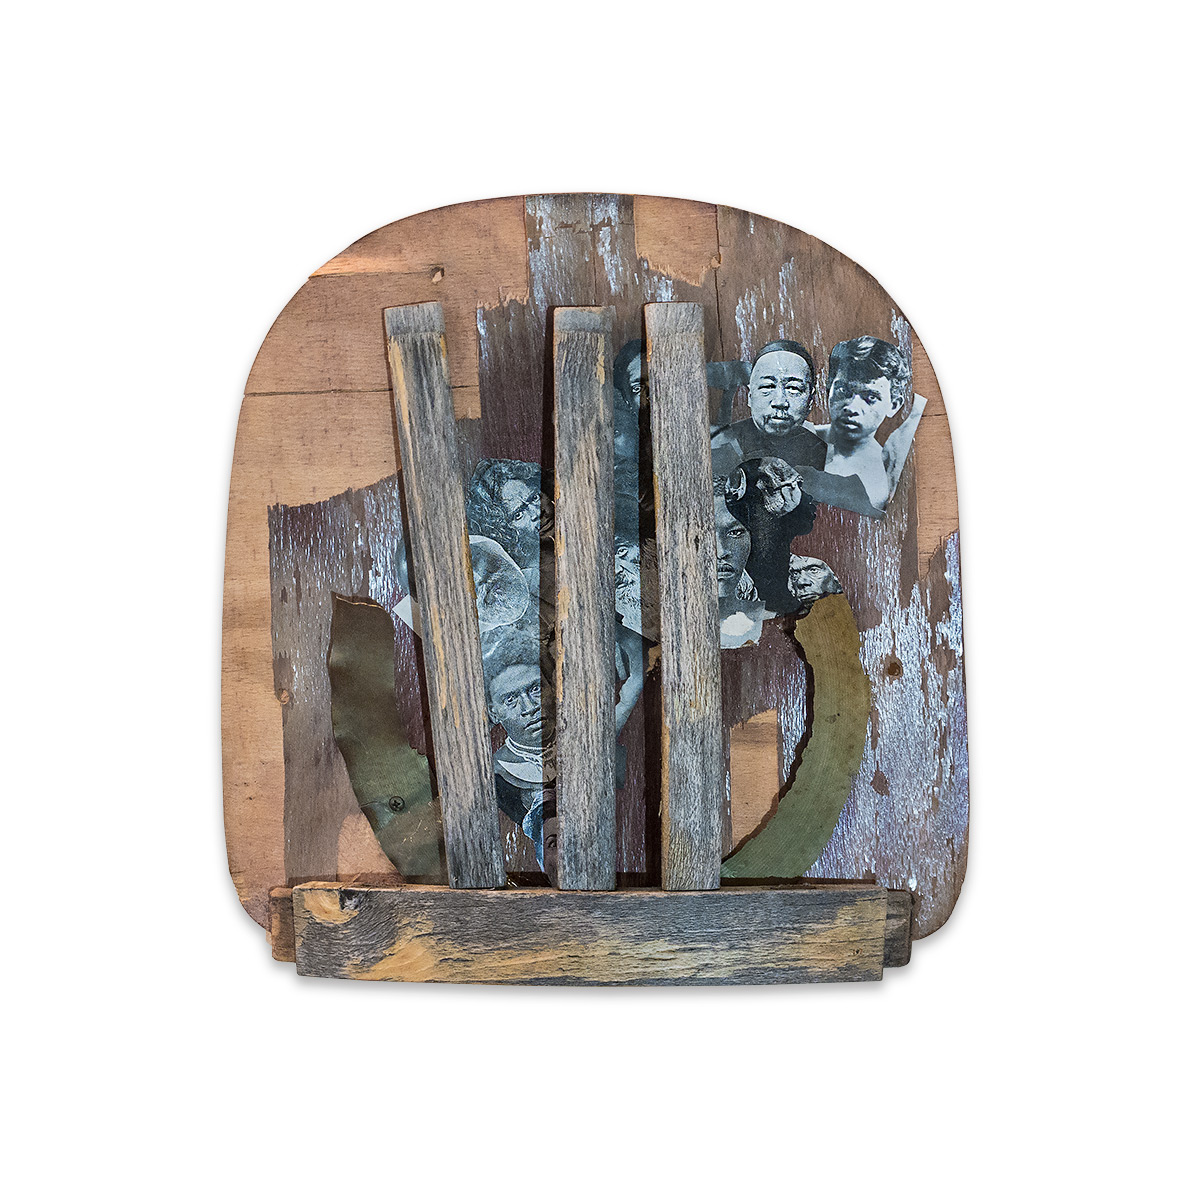  LINEAGE 2014 found wood/mixed media 15.5 x 3 x 15 in 